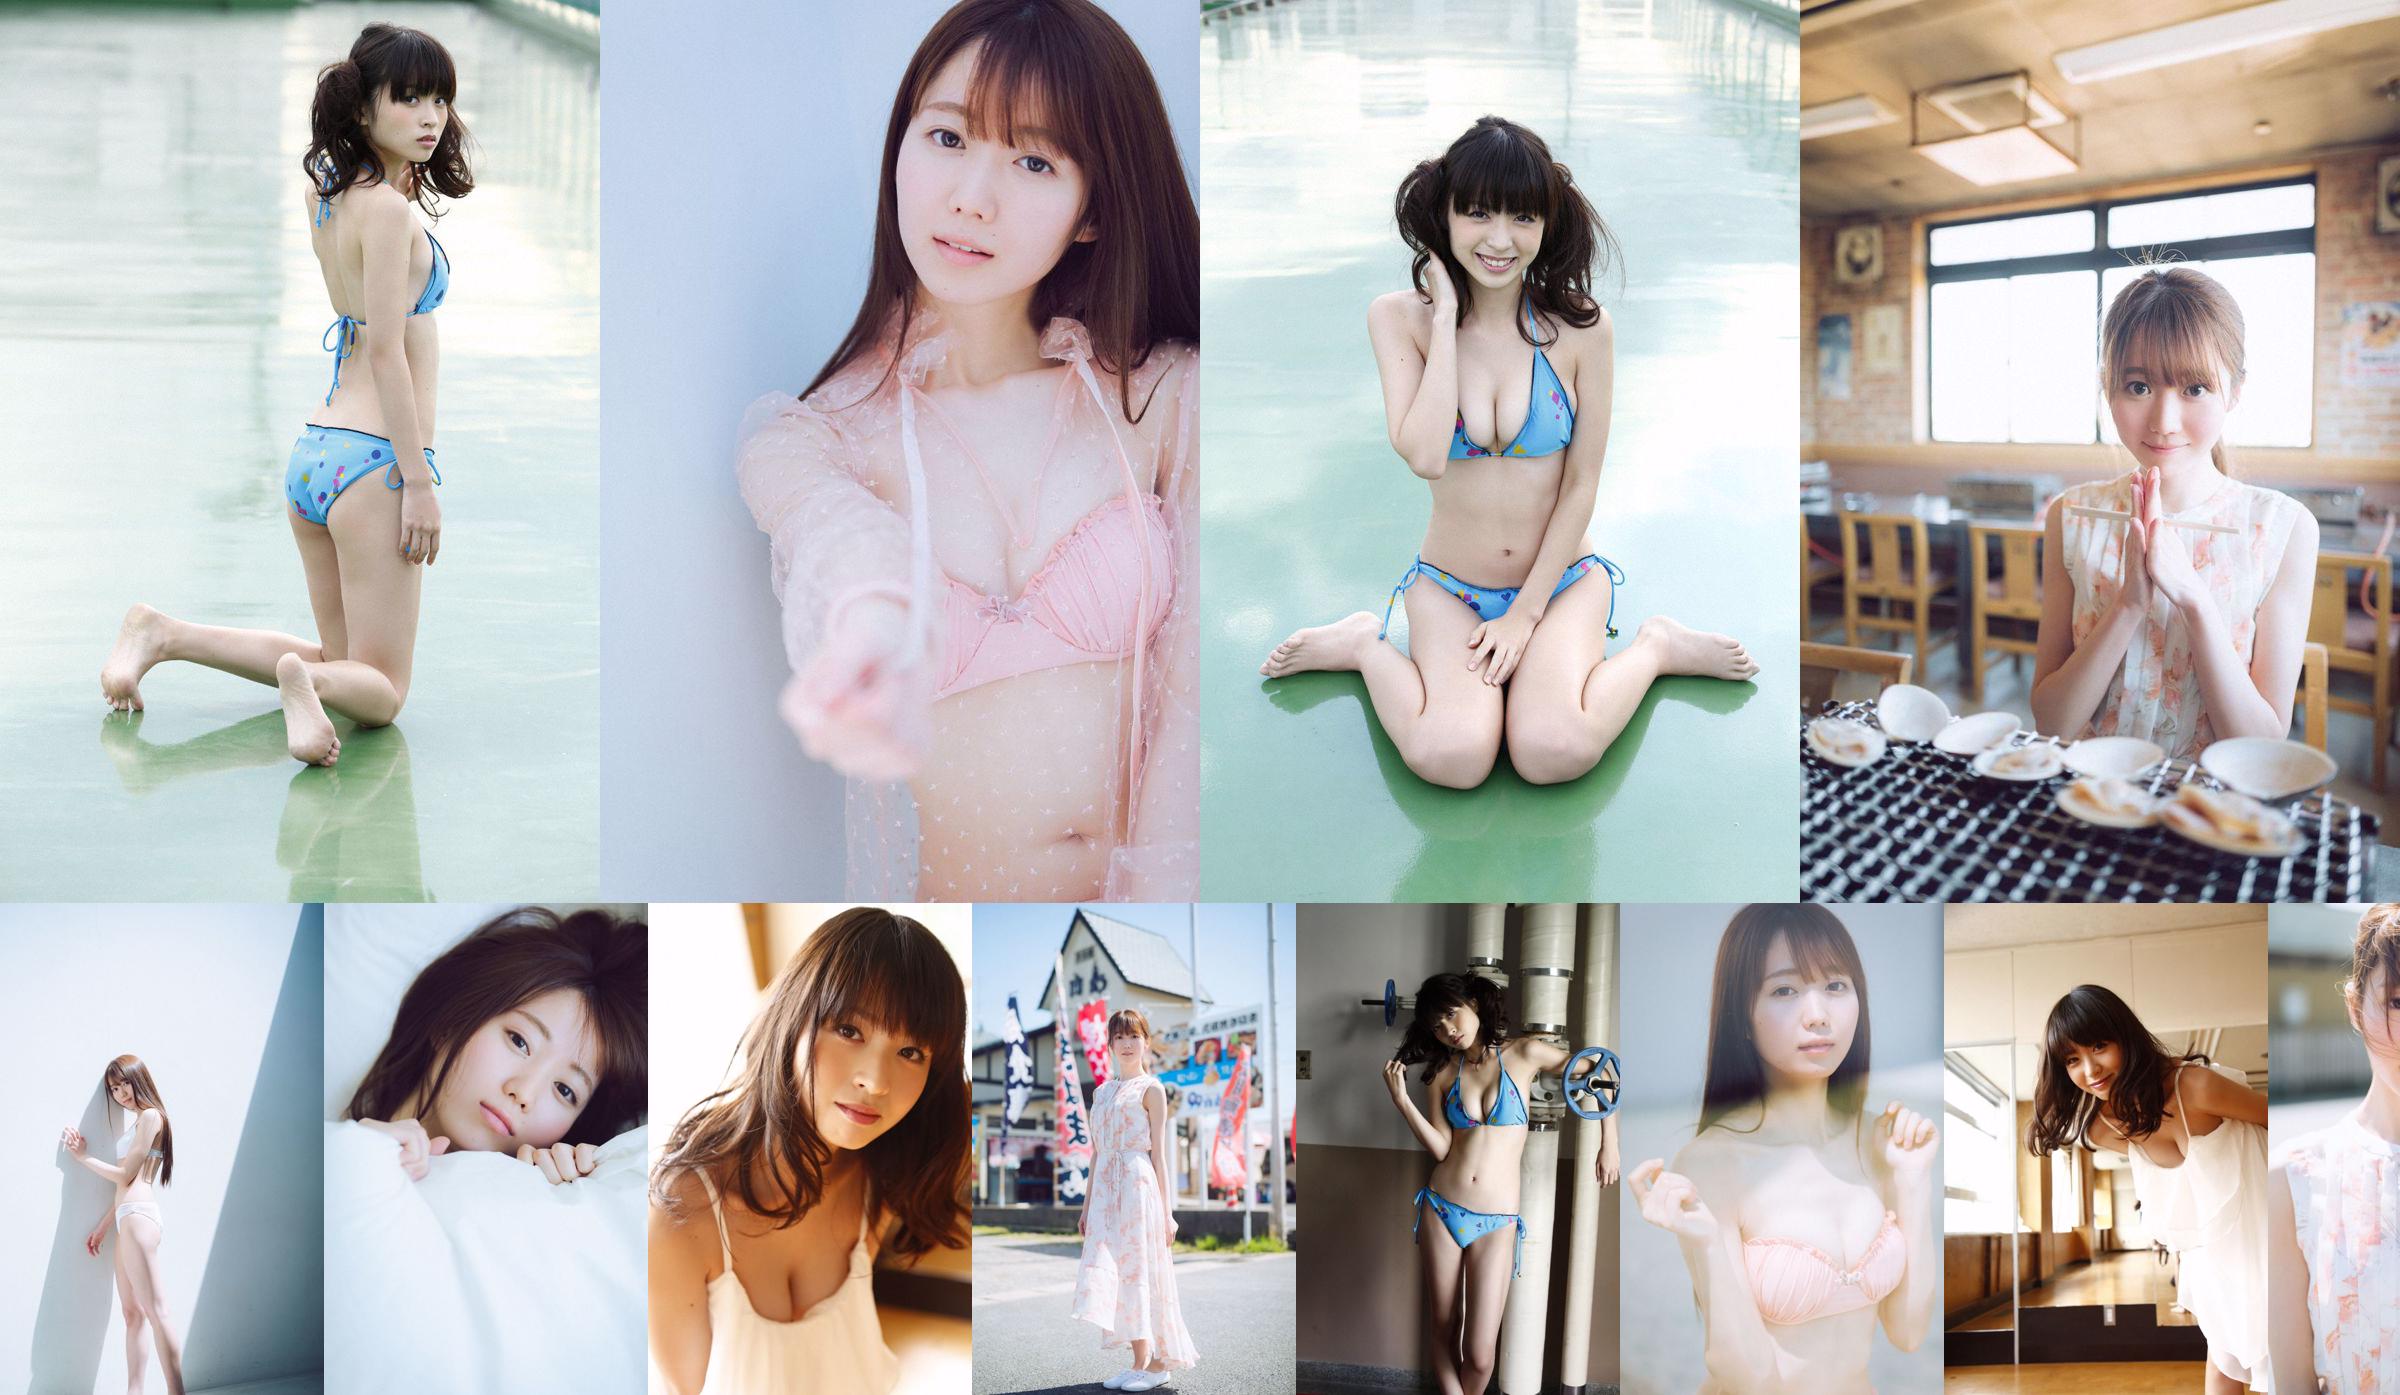 Emiri Otani "With you and two." [WPB-net] Extra734 No.796c28 Page 10